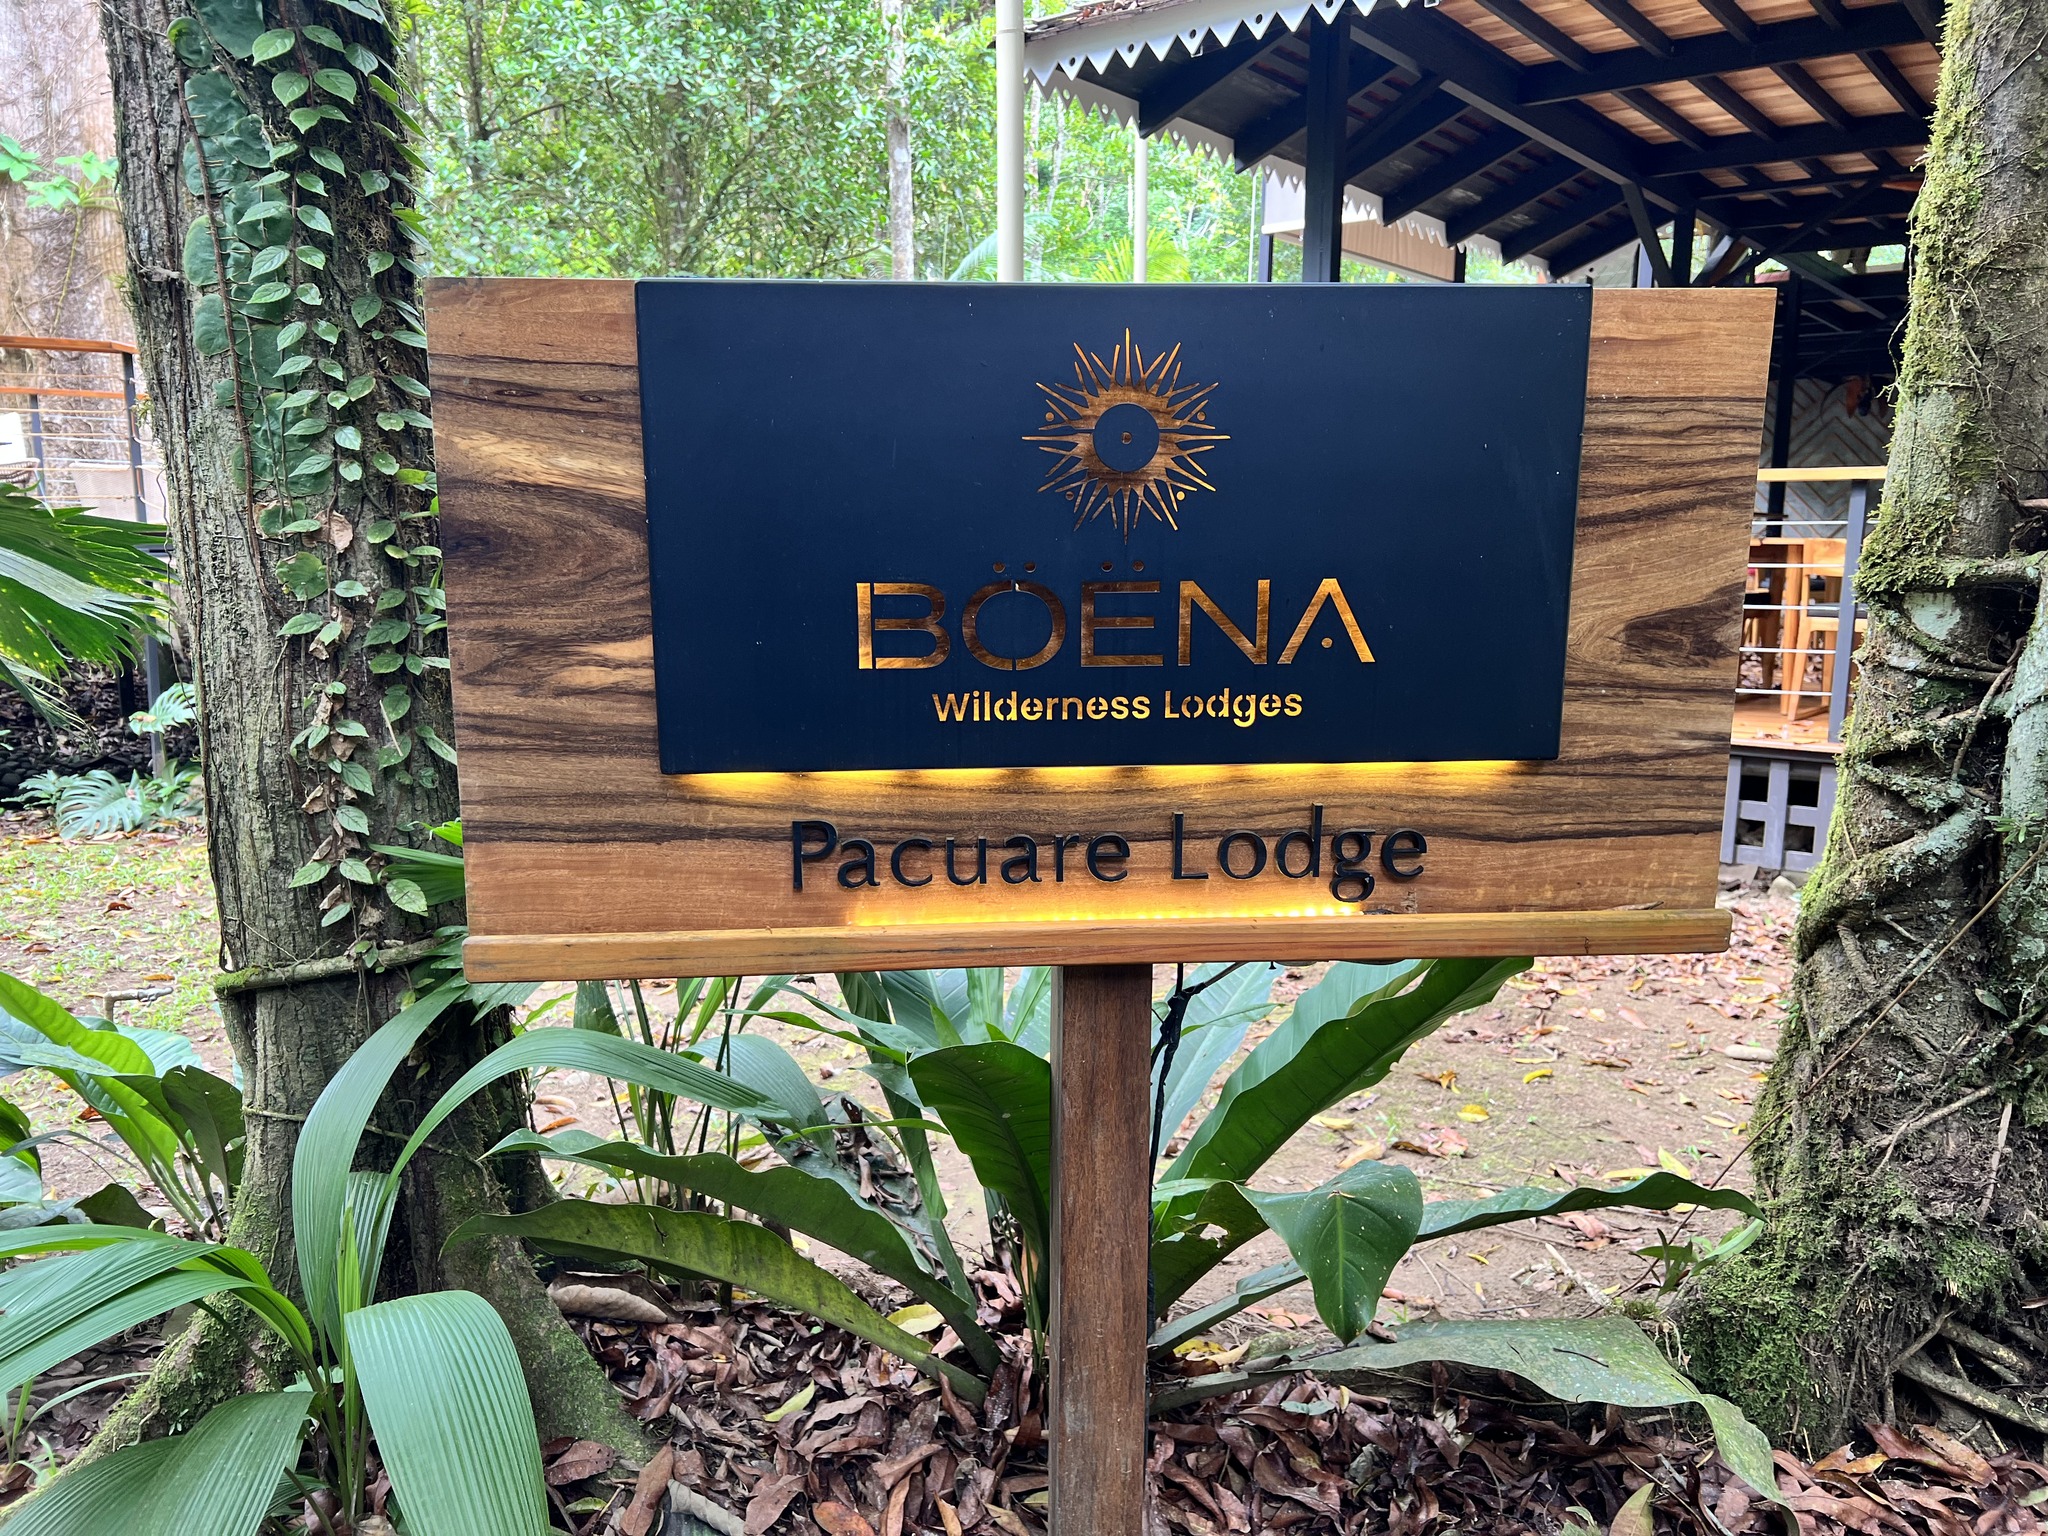 Luxury eco-friendly lodges in Costa Rica, have been using EM since last year